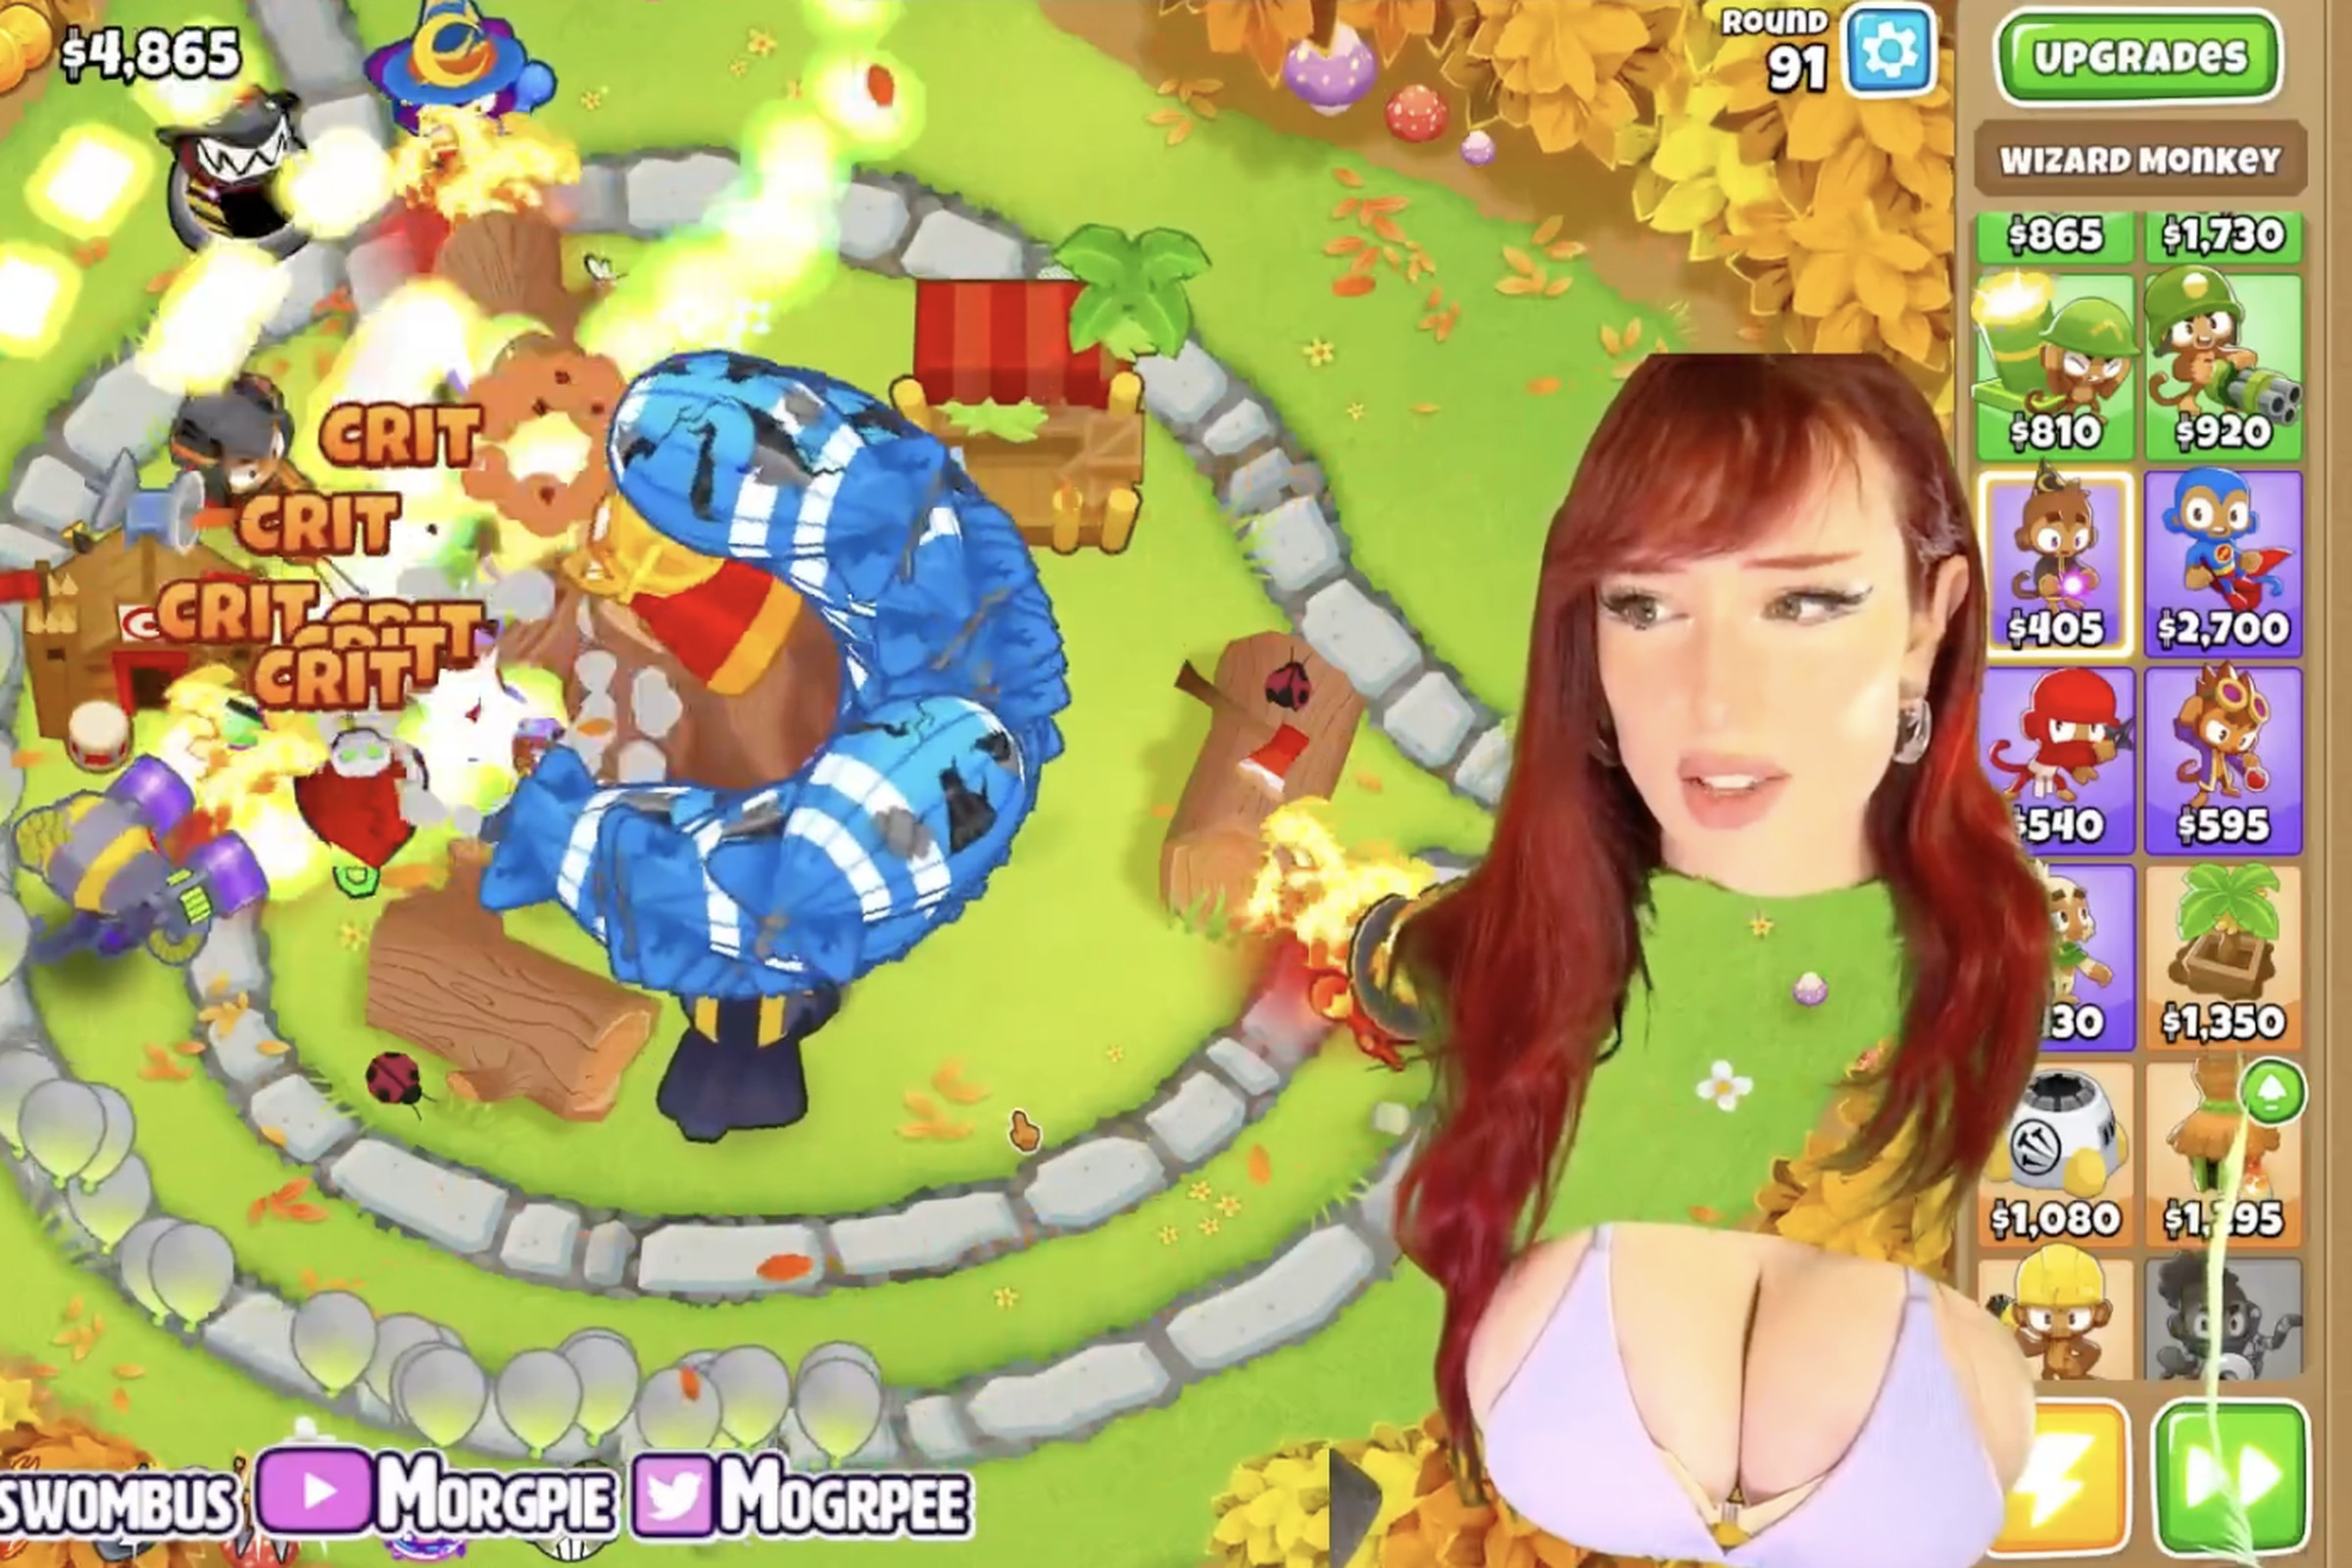 Screenshot from the livestream of Twitch creator Morgpie, a red-haired woman playing Bloons TD 6